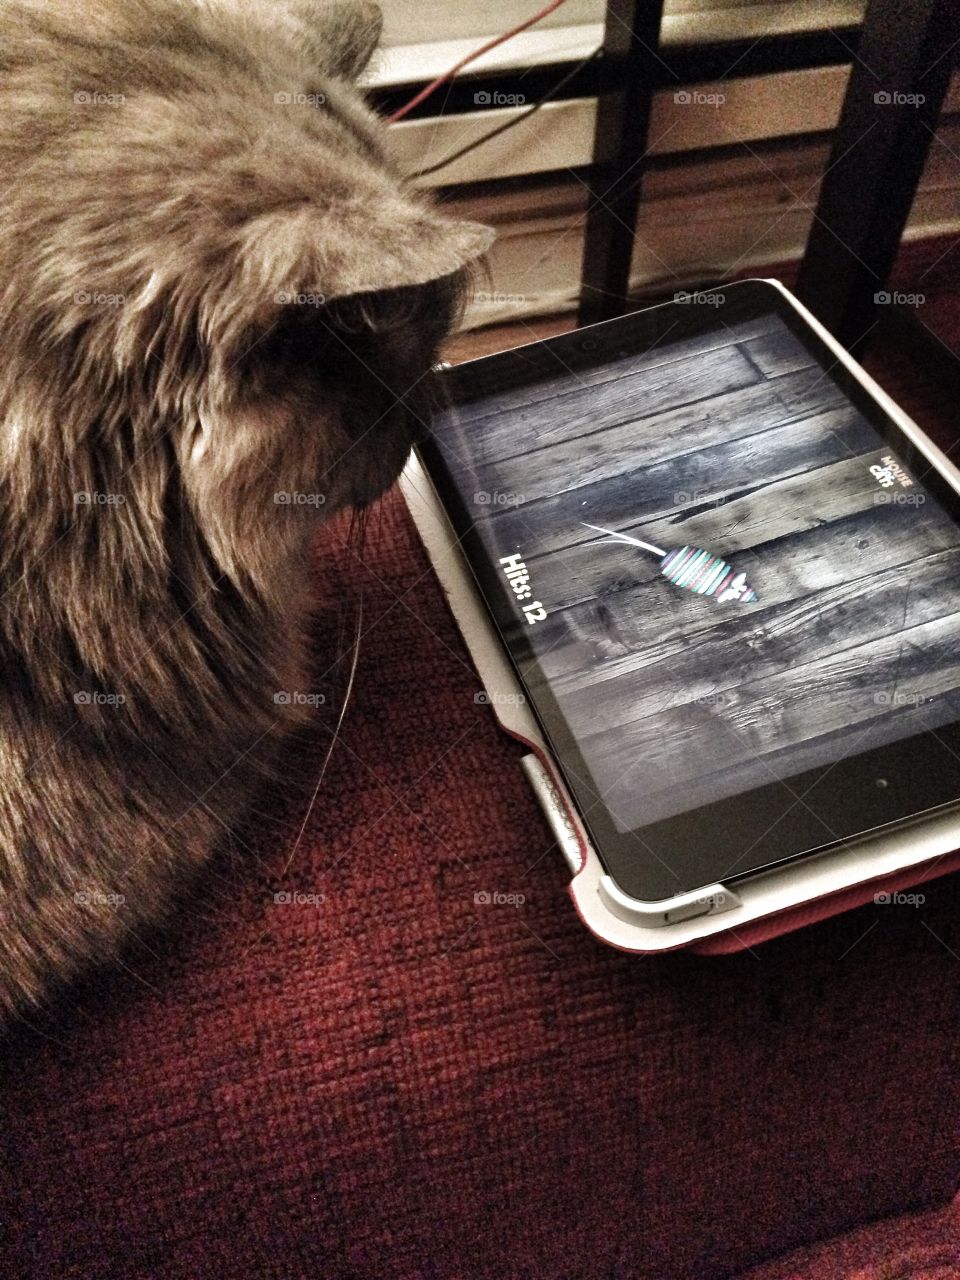 Cat looking at mouse in mobile screen